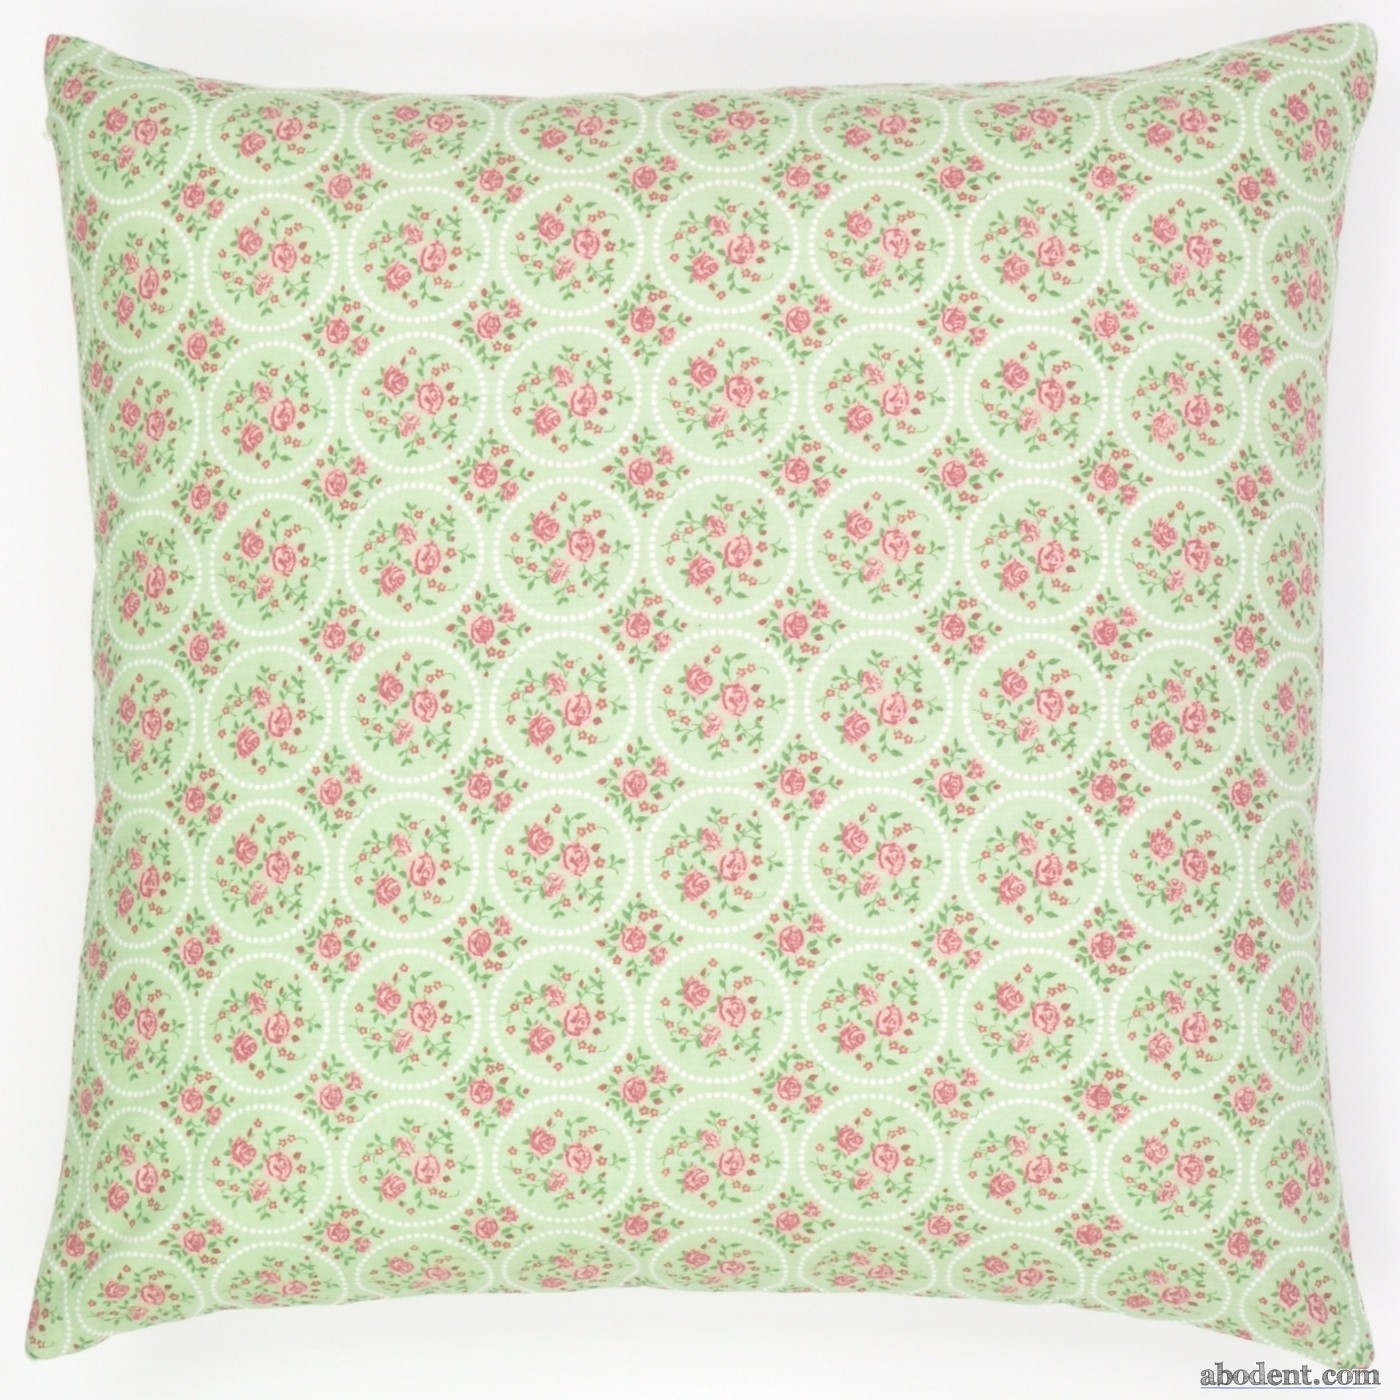 Flora Flora Flora Cushion Cover | Flower and Lace Cushion | abodent.com